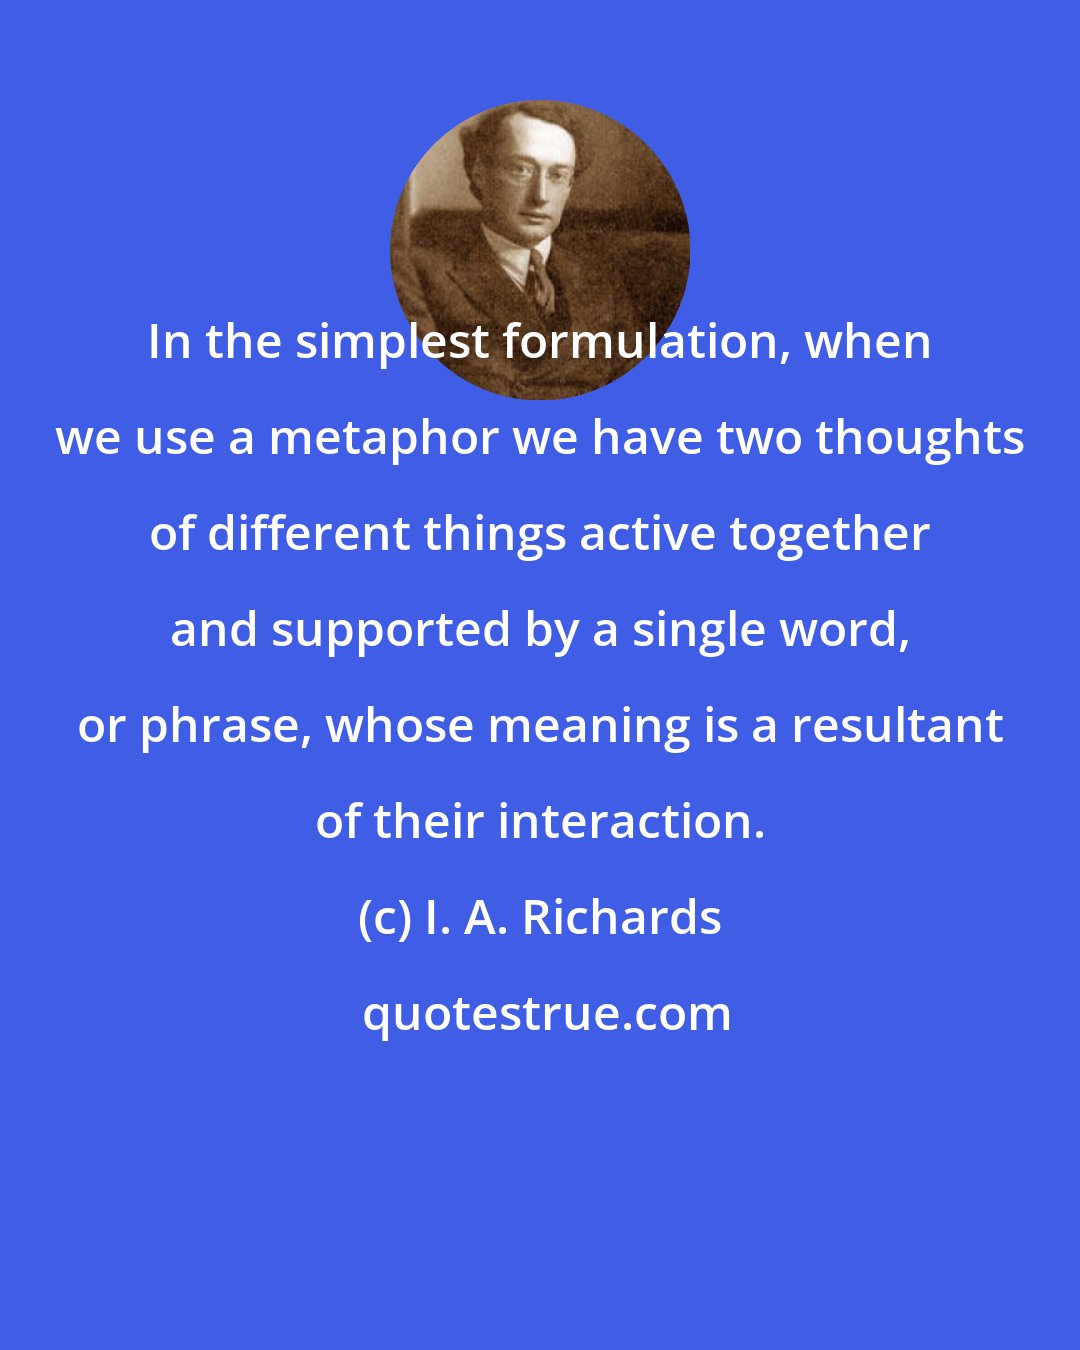 I. A. Richards: In the simplest formulation, when we use a metaphor we have two thoughts of different things active together and supported by a single word, or phrase, whose meaning is a resultant of their interaction.